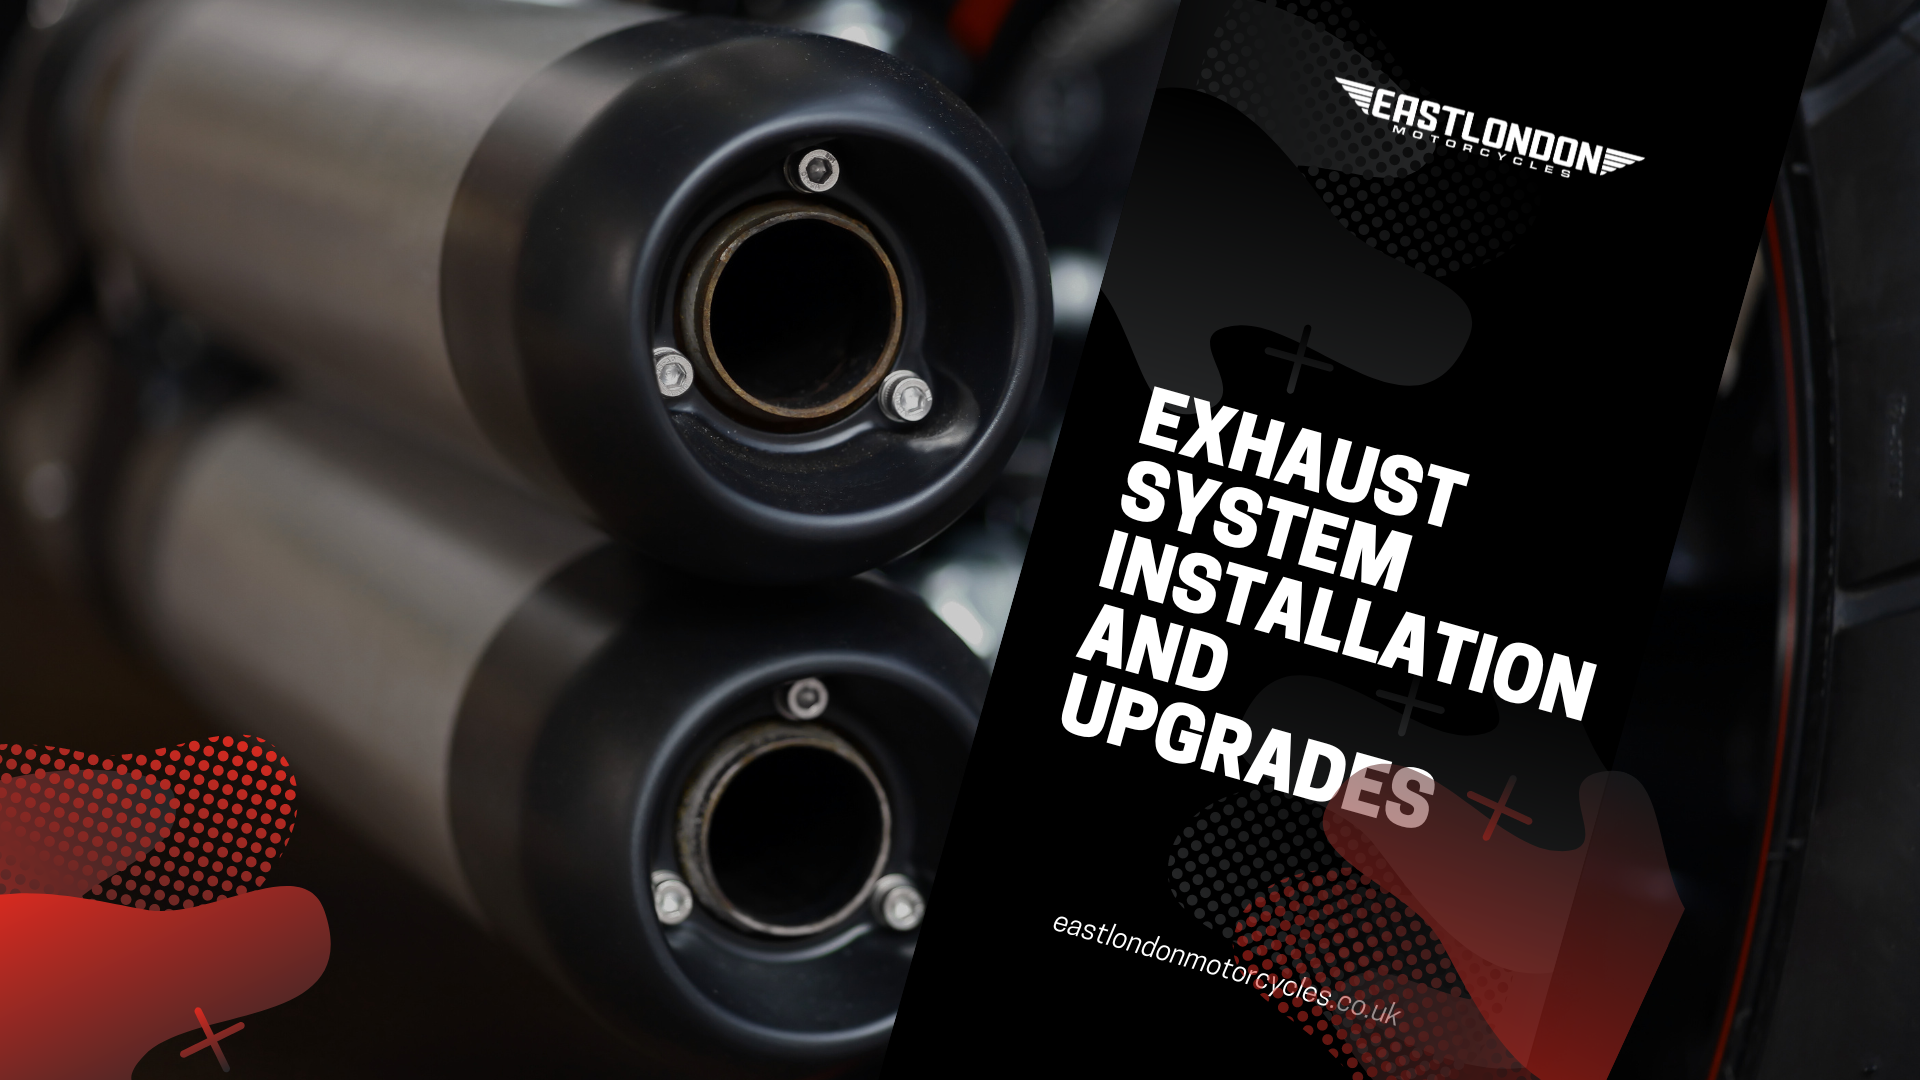 Exhaust System Installation and Upgrades